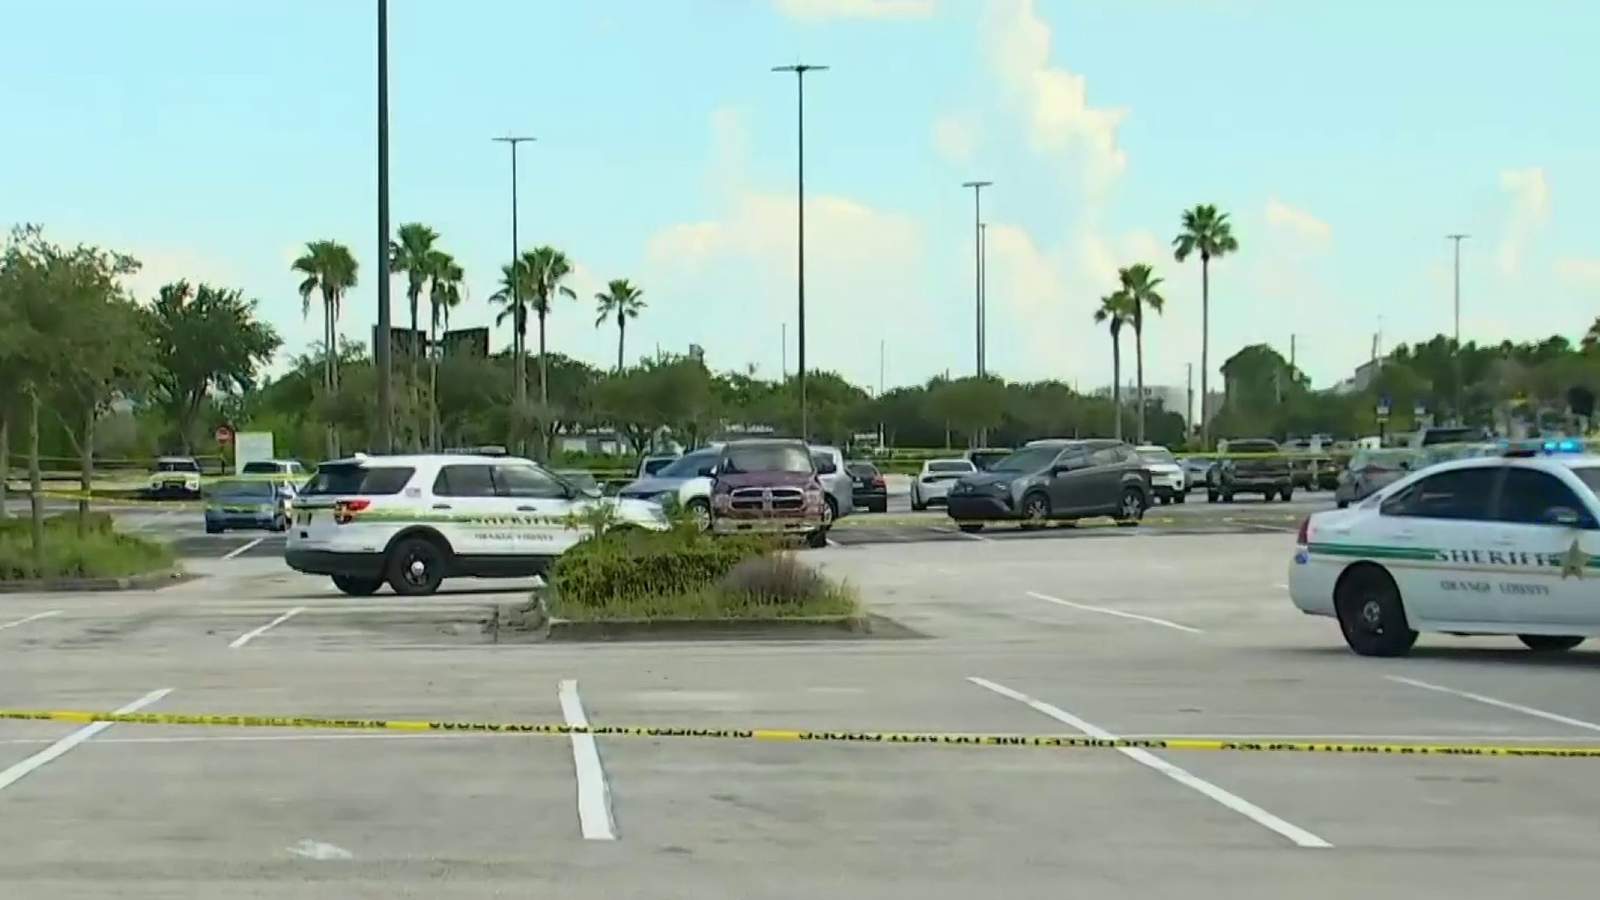 Deputies say they can’t yet release body camera video of fatal shooting at Florida Mall